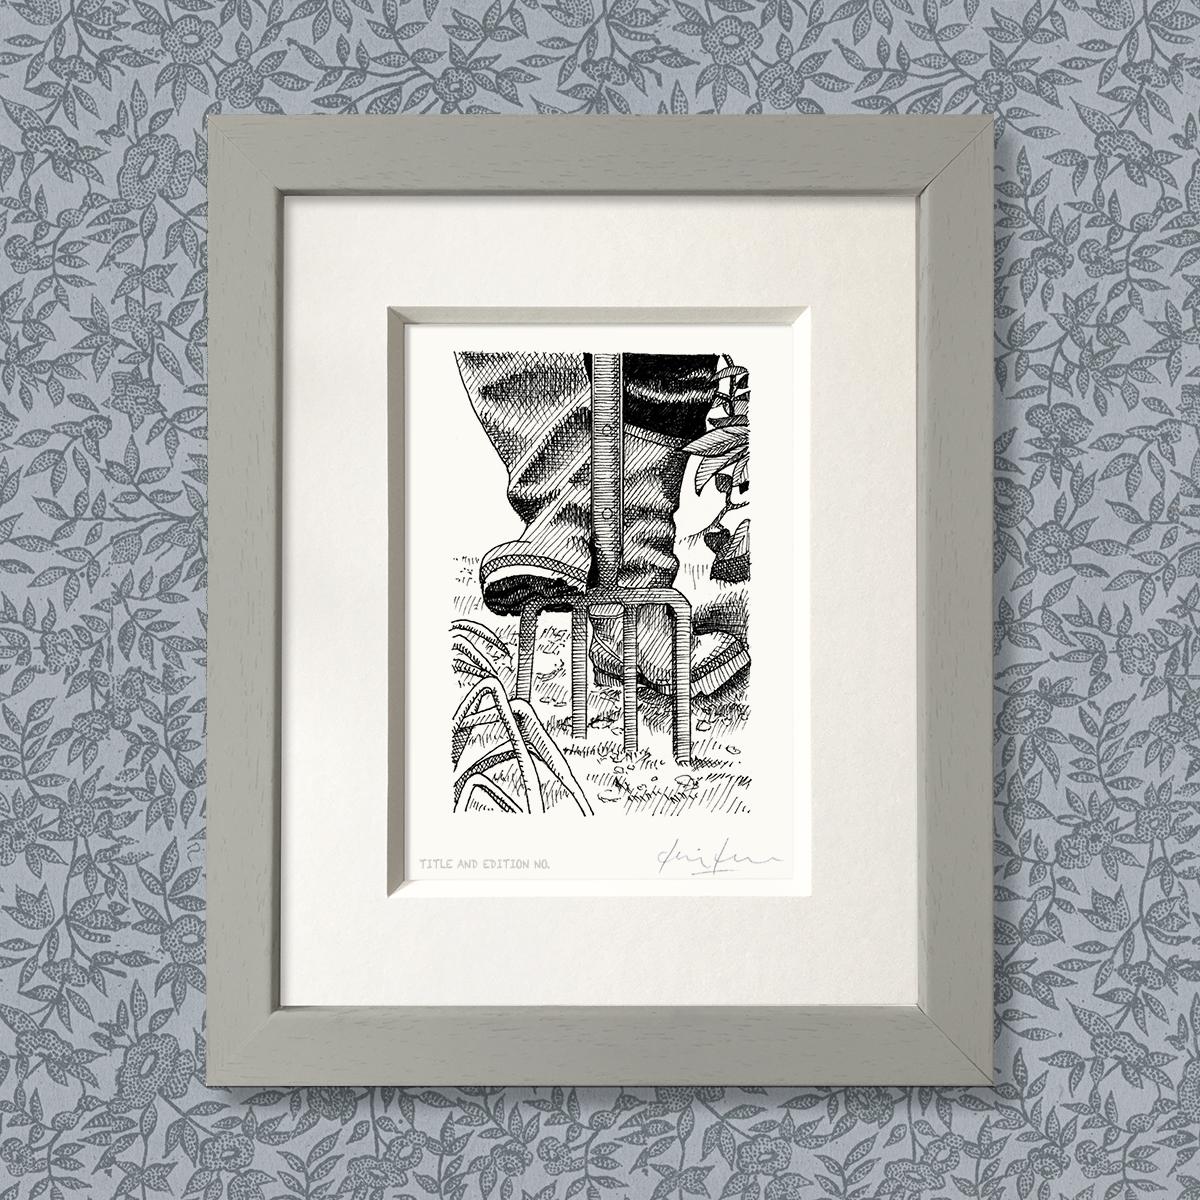 Limited edition print from pen and ink drawing of someone digging in a grey frame